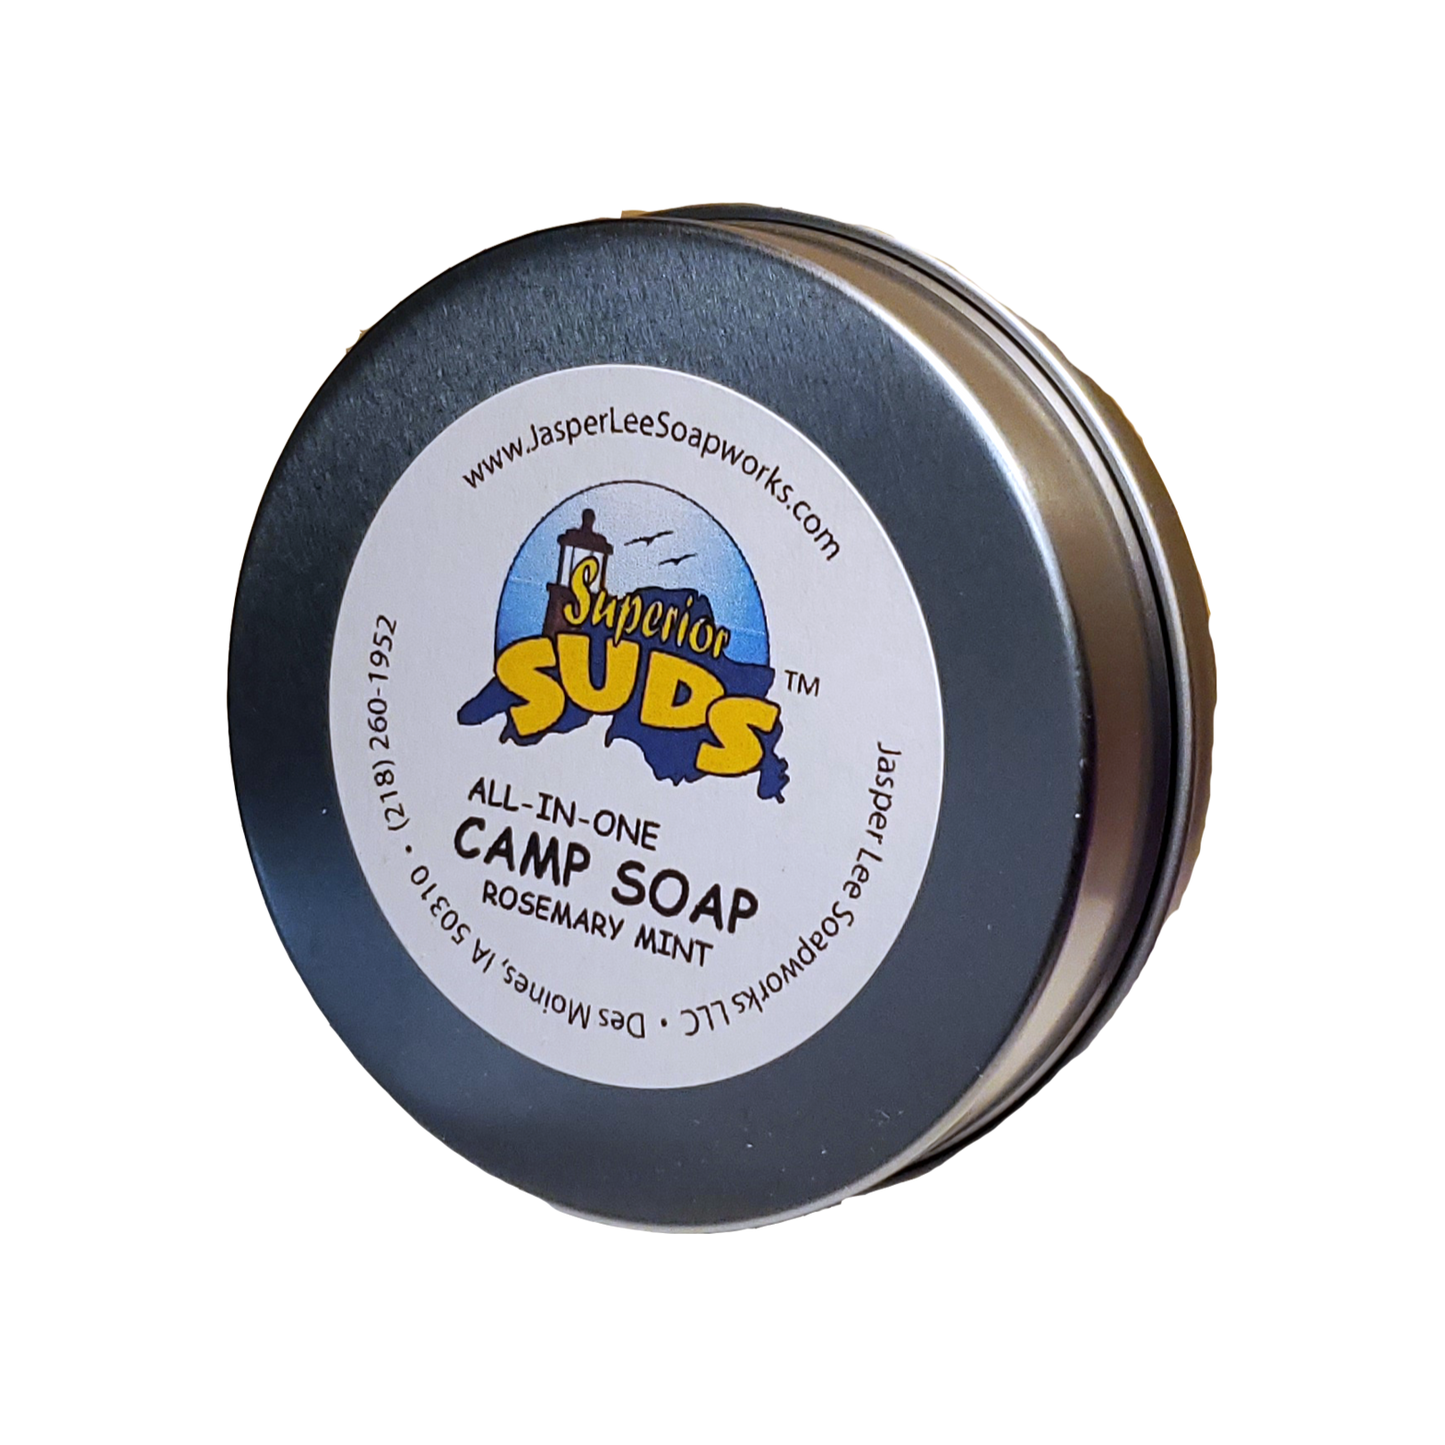  All-in-one Camp Soap in silver carrying tin 